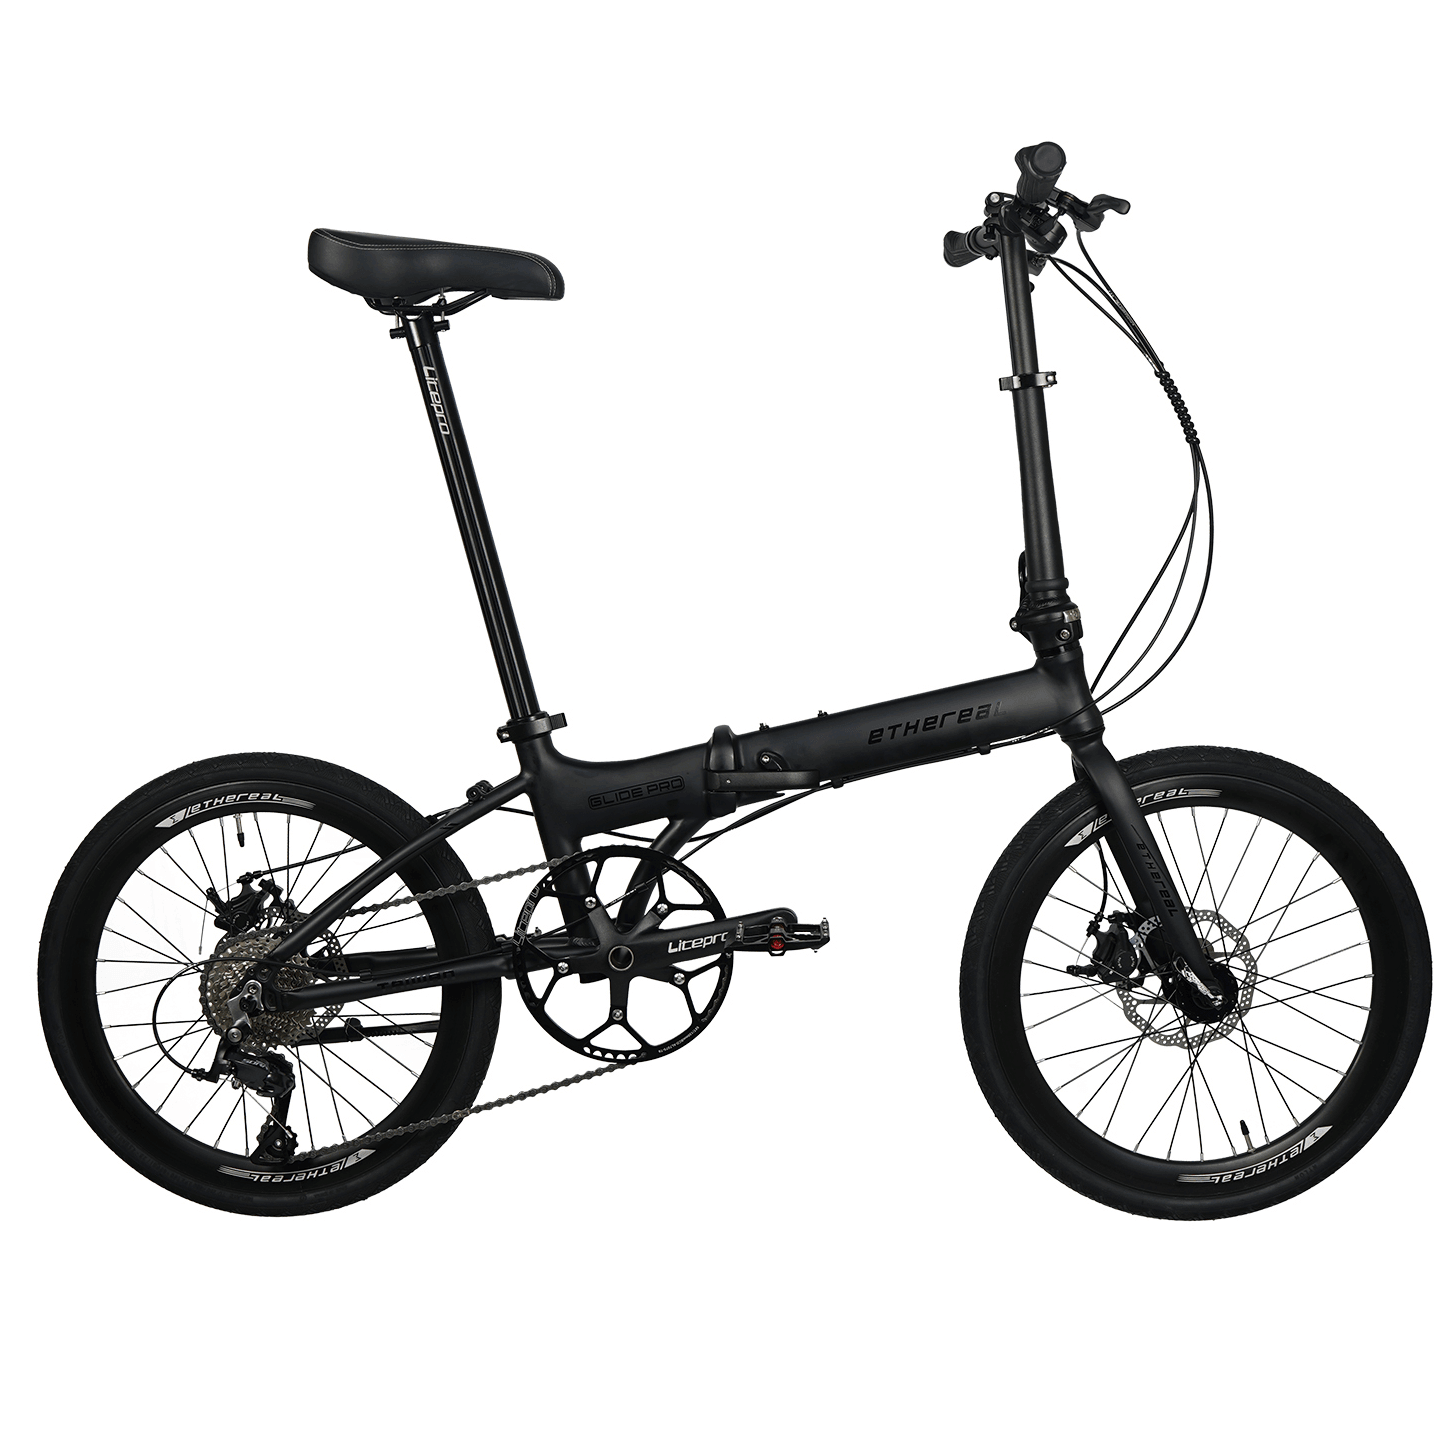 Foldable Ethereal Glide PRO Bicycle with Shimano Sora & Altus 9-Speed, Lightweight Aluminum Frame, and Zoom X-Tech Brakes - The Bike Atrium - Best Bicycle Shop in Singapore